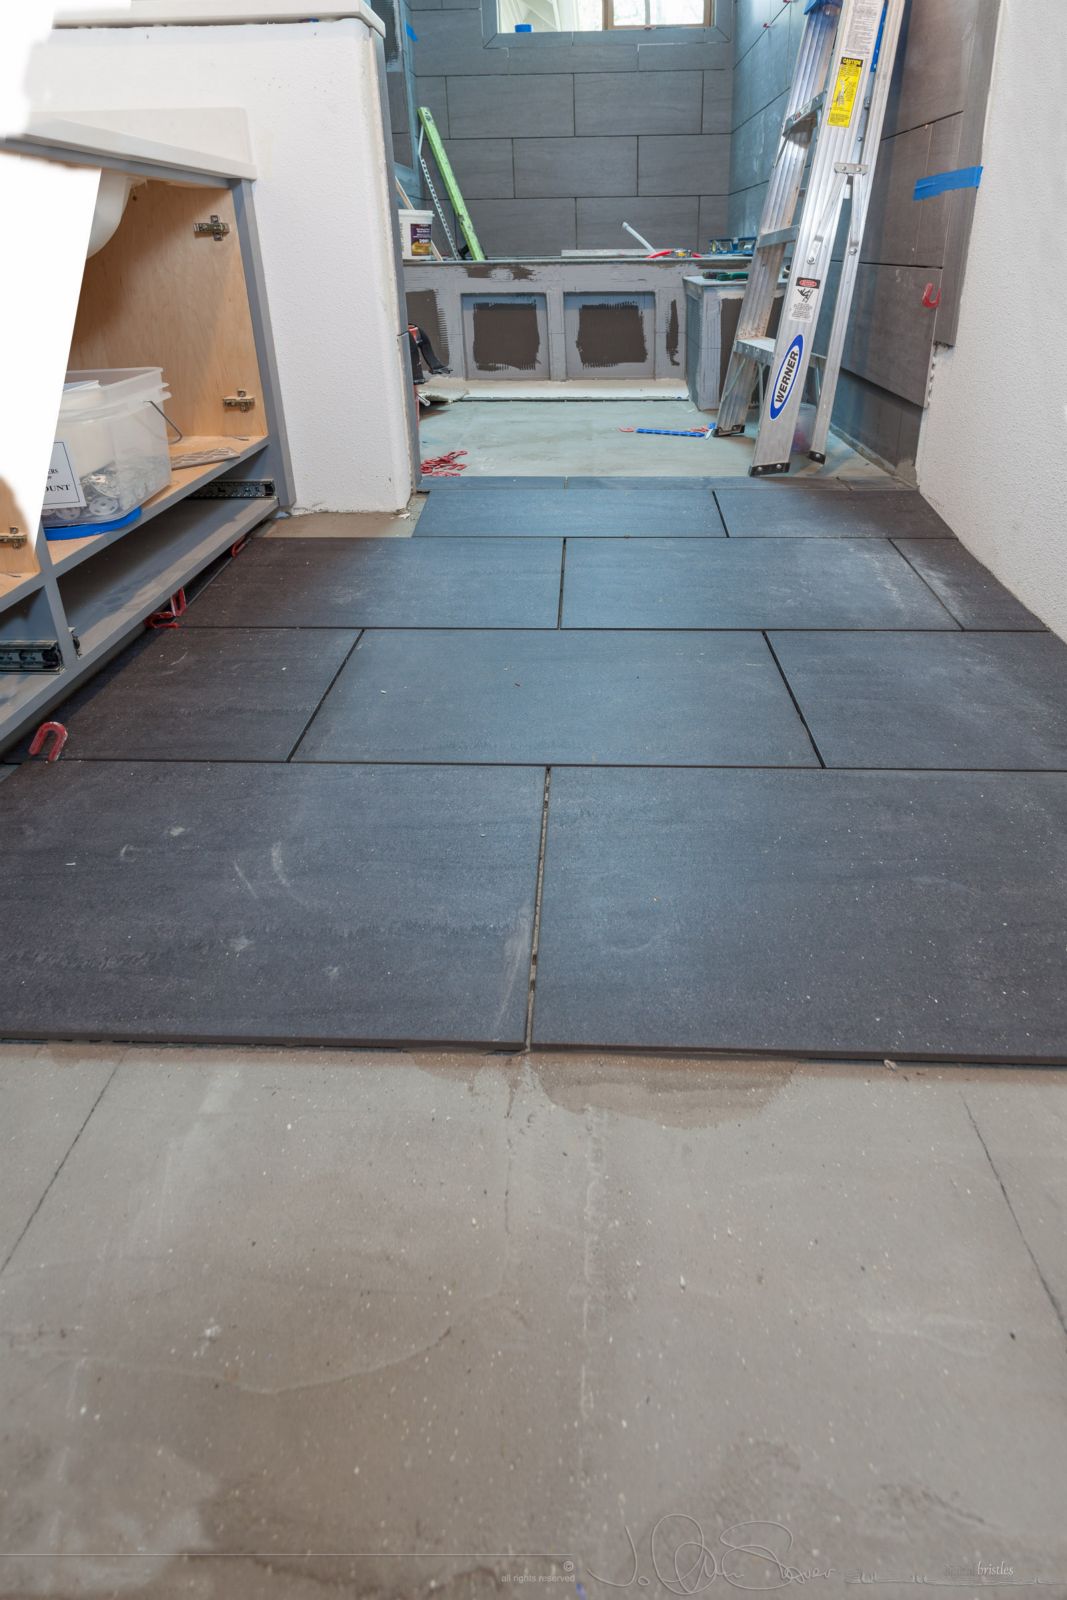 Partial floor installation to allow glass wall/door to be templated. April 13th